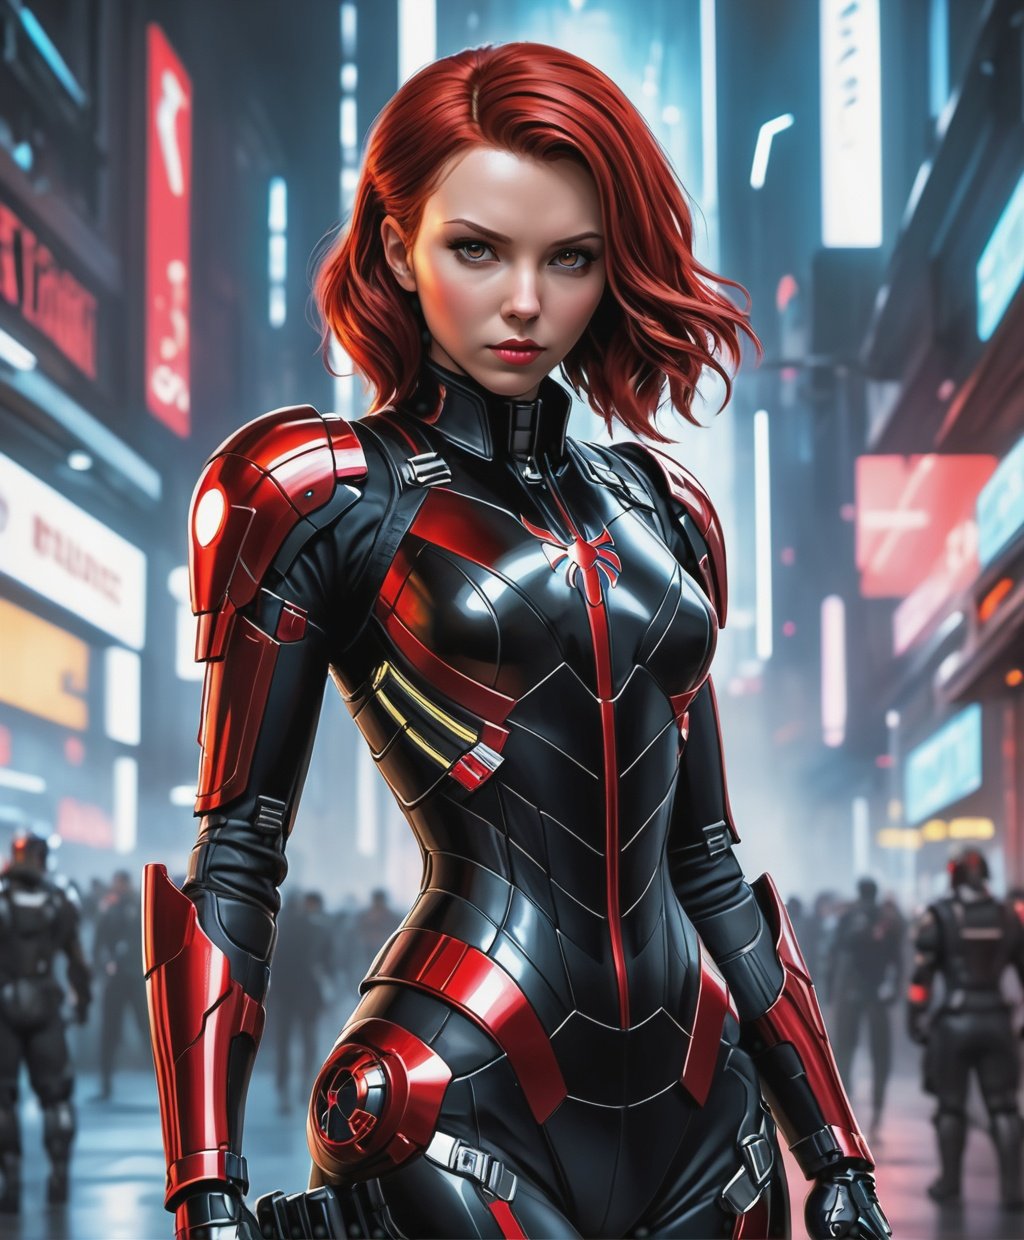 A Hi-Tech cyberpunk style red black black widow suit, Custom design, shining body, glowing look, looking at camera, full shining suit, body, hues, steampunk style, cyberpunk style ,mecha, perfect custom Hi-Tech suit, holding sword, weapon master, hyper detailed,